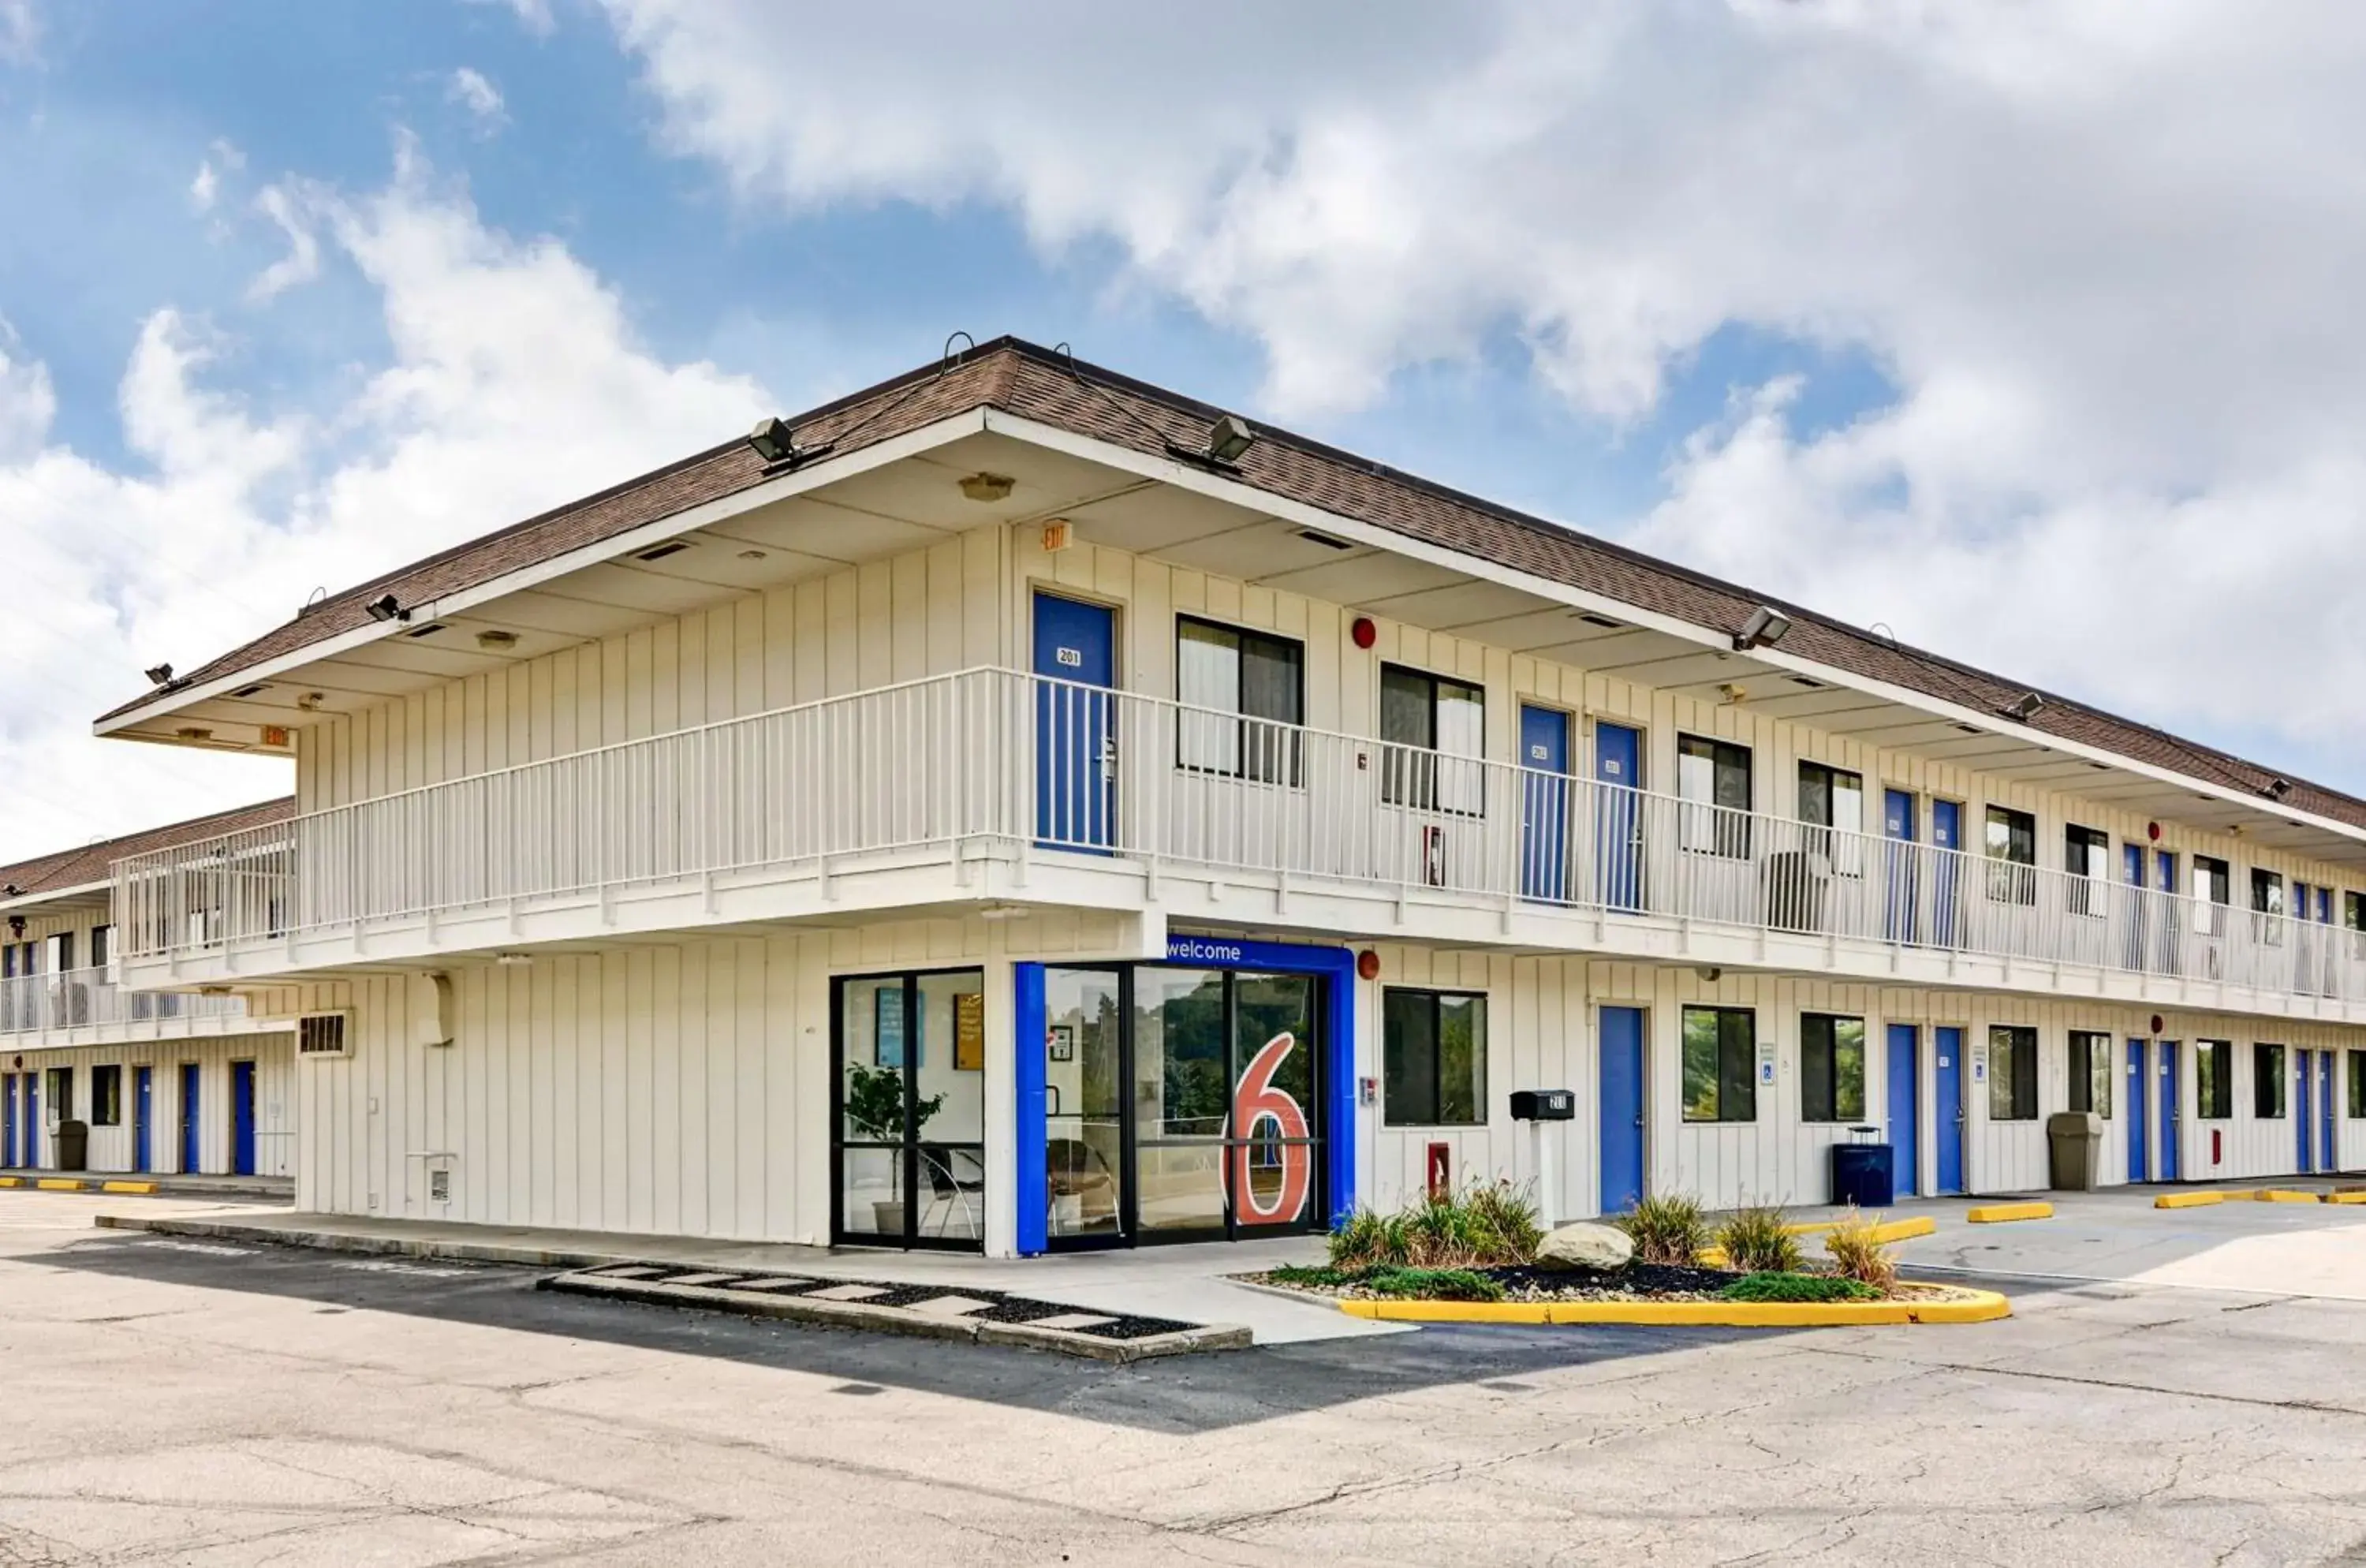 Property building in Motel 6-Pittsburgh, PA - Crafton